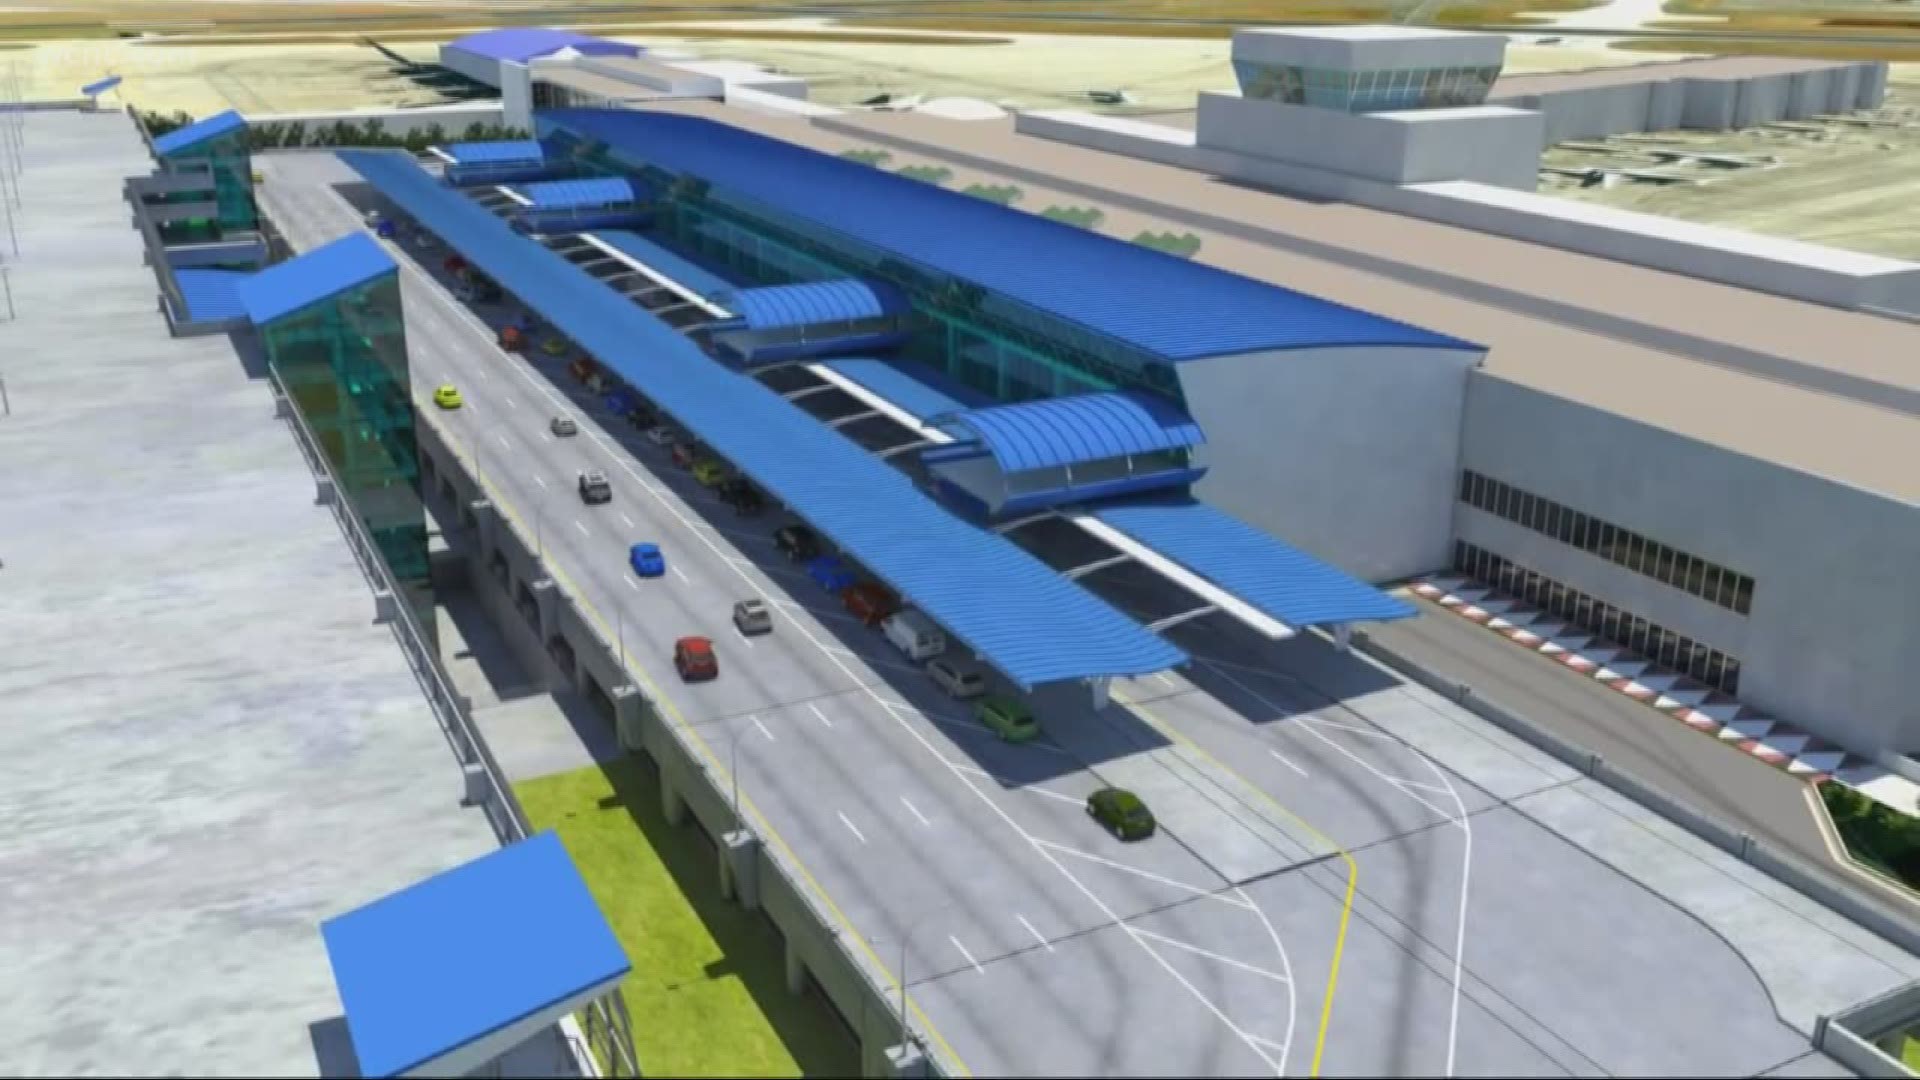 Crews are expected to break ground -- on yet another construction project at Charlotte Douglas Airport.